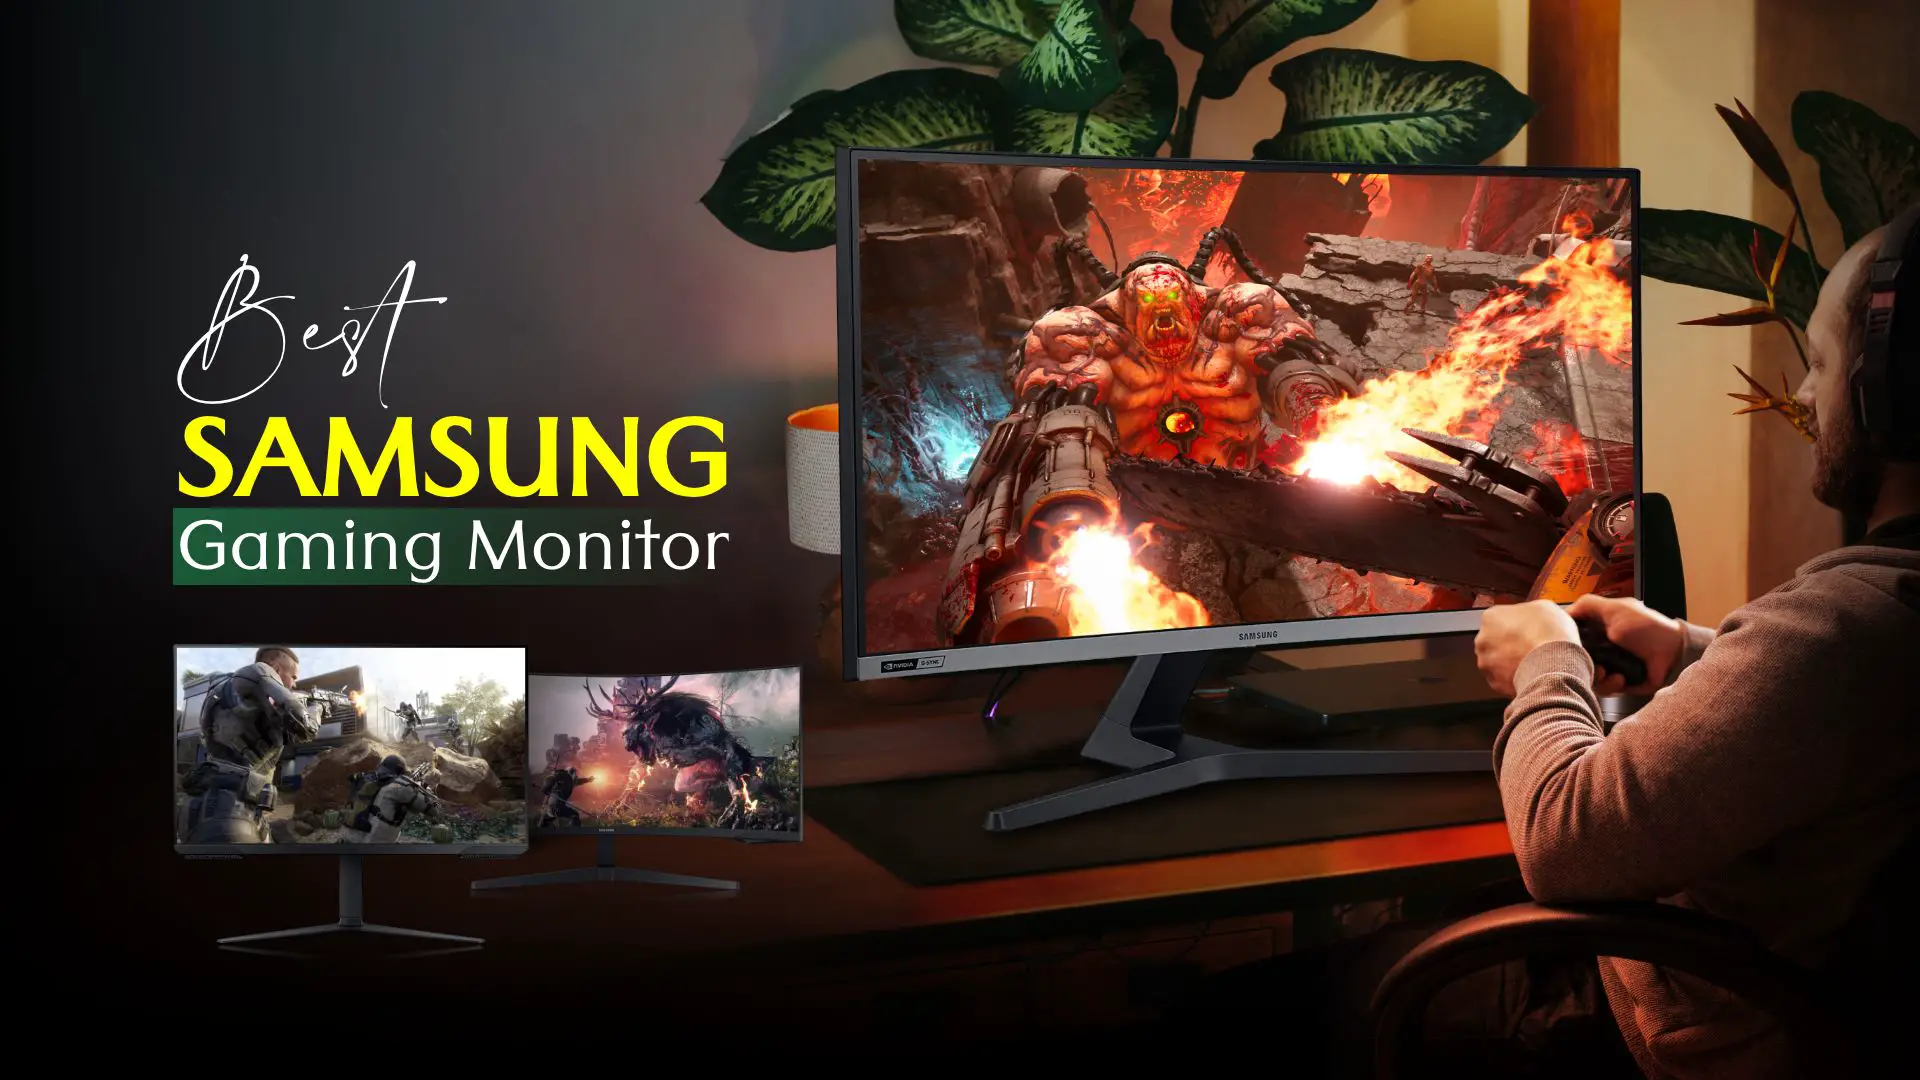 7 Best Samsung Gaming Monitors for Better Gaming Experience